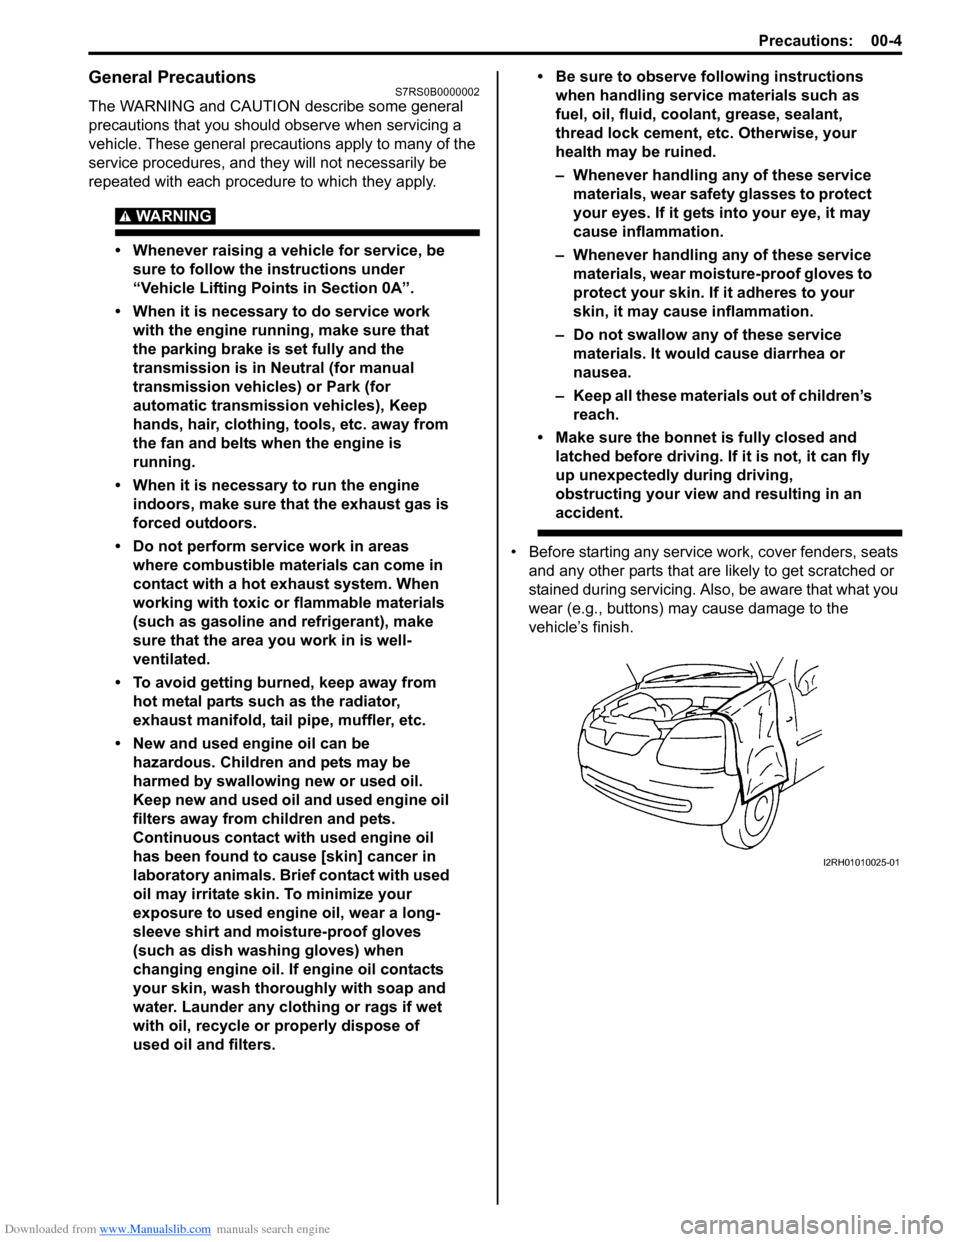 SUZUKI SWIFT 2008 2.G Service Workshop Manual Downloaded from www.Manualslib.com manuals search engine Precautions: 00-4
General PrecautionsS7RS0B0000002
The WARNING and CAUTION describe some general 
precautions that you should observe when serv